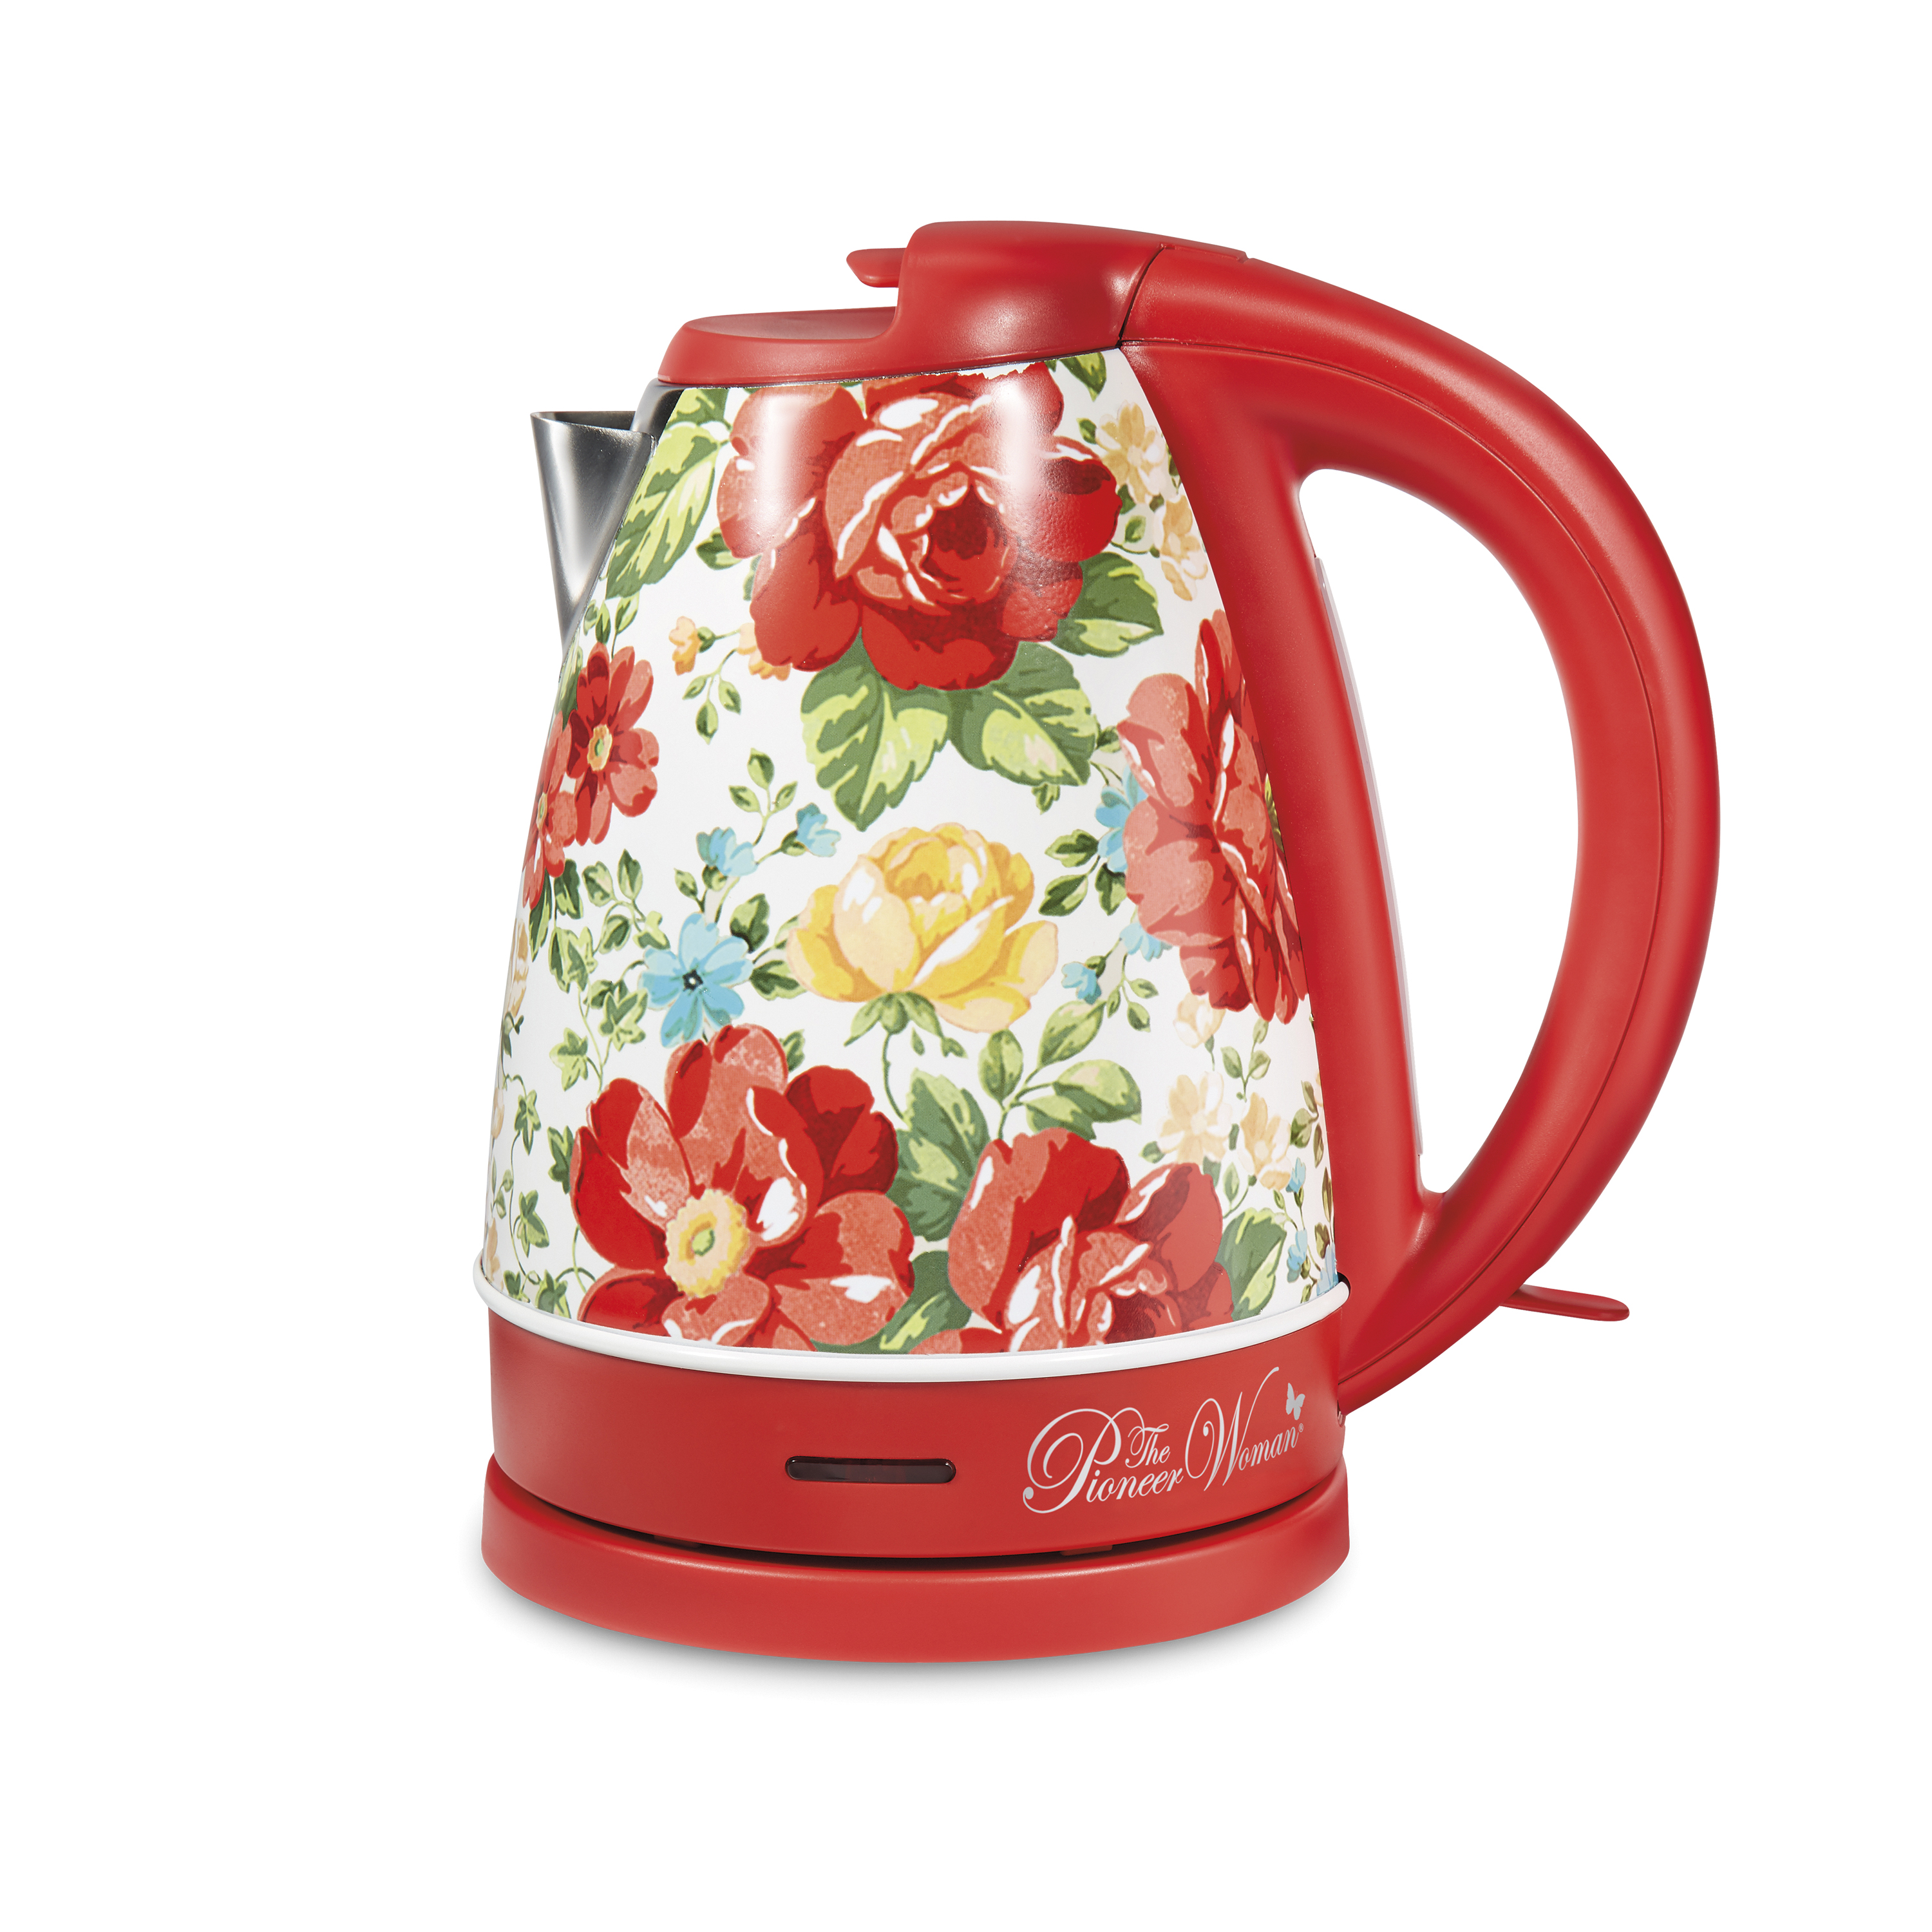 The Pioneer Woman Electric Kettle, Vintage Floral Red, 1.7-Liter, Model 40972 - image 1 of 10